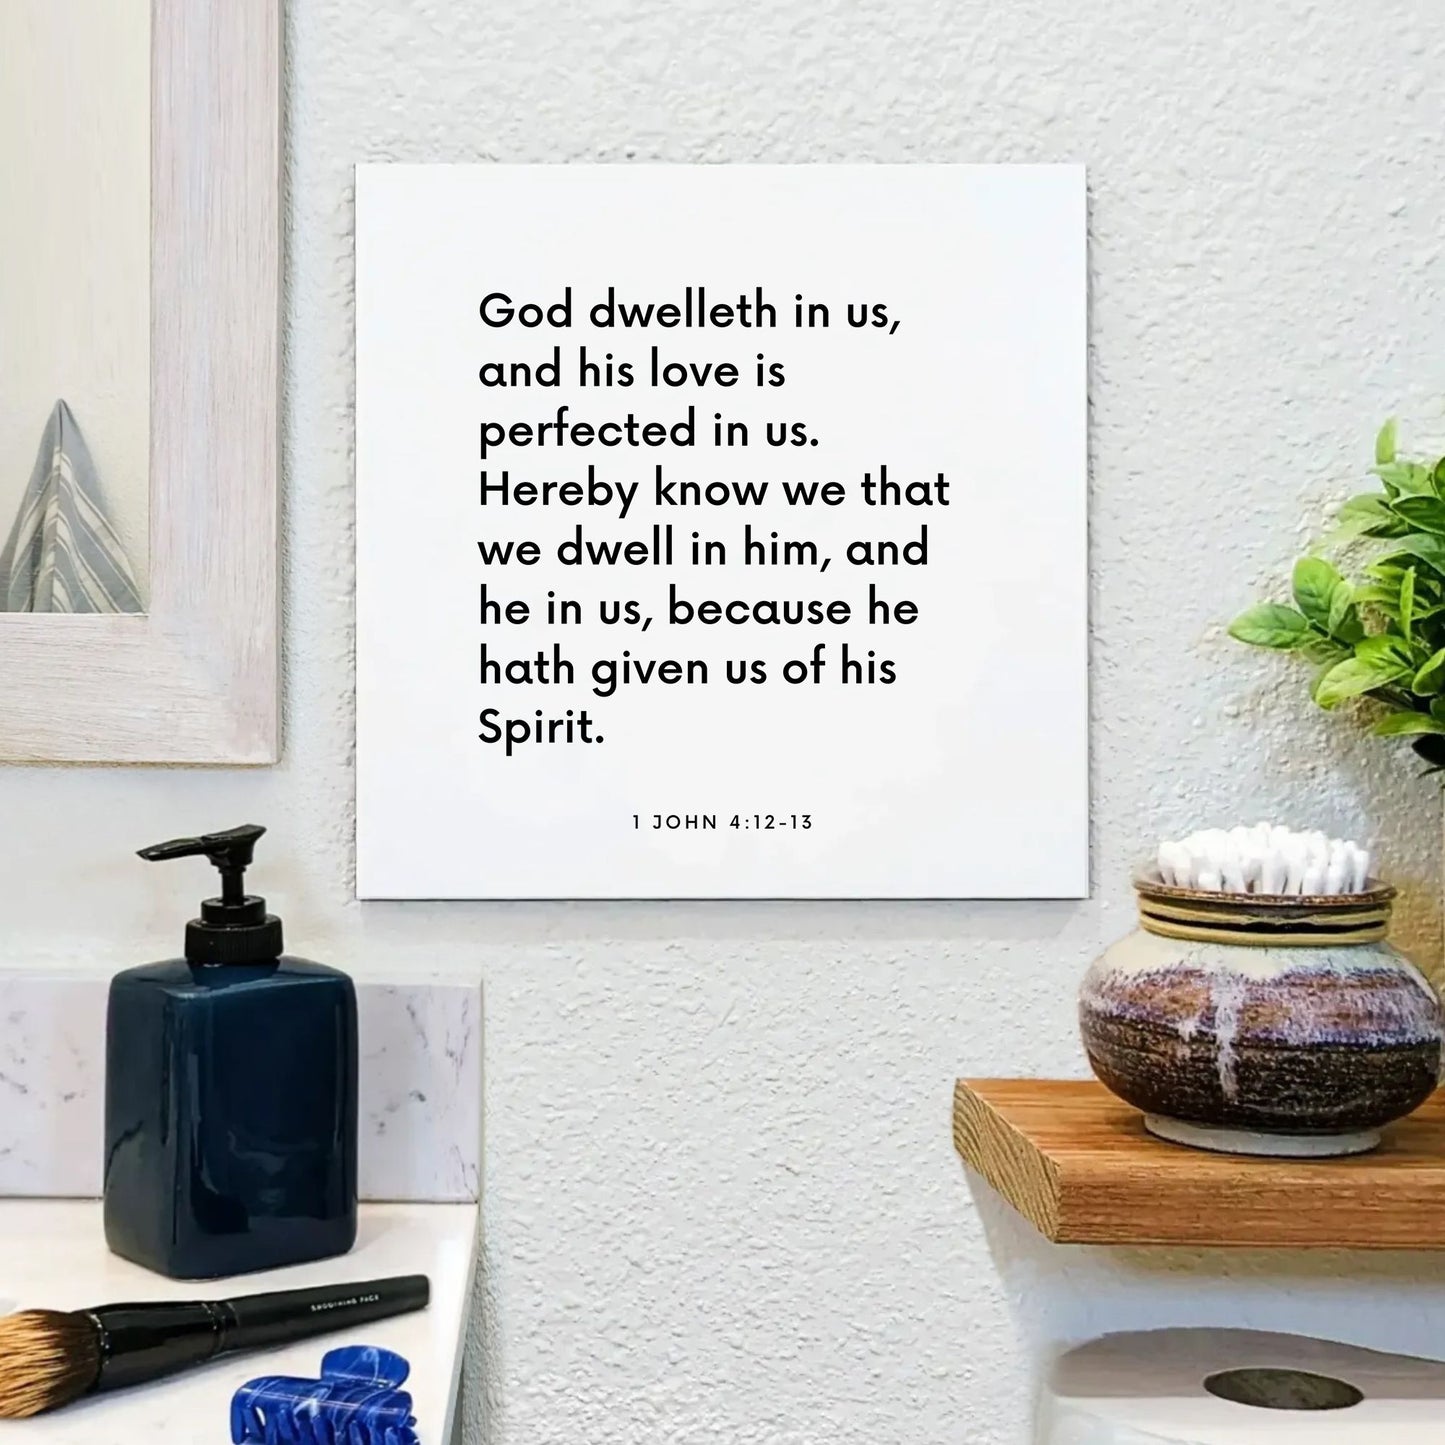 Bathroom mouting of the scripture tile for 1 John 4:12-13 - "Hereby know we that we dwell in him"